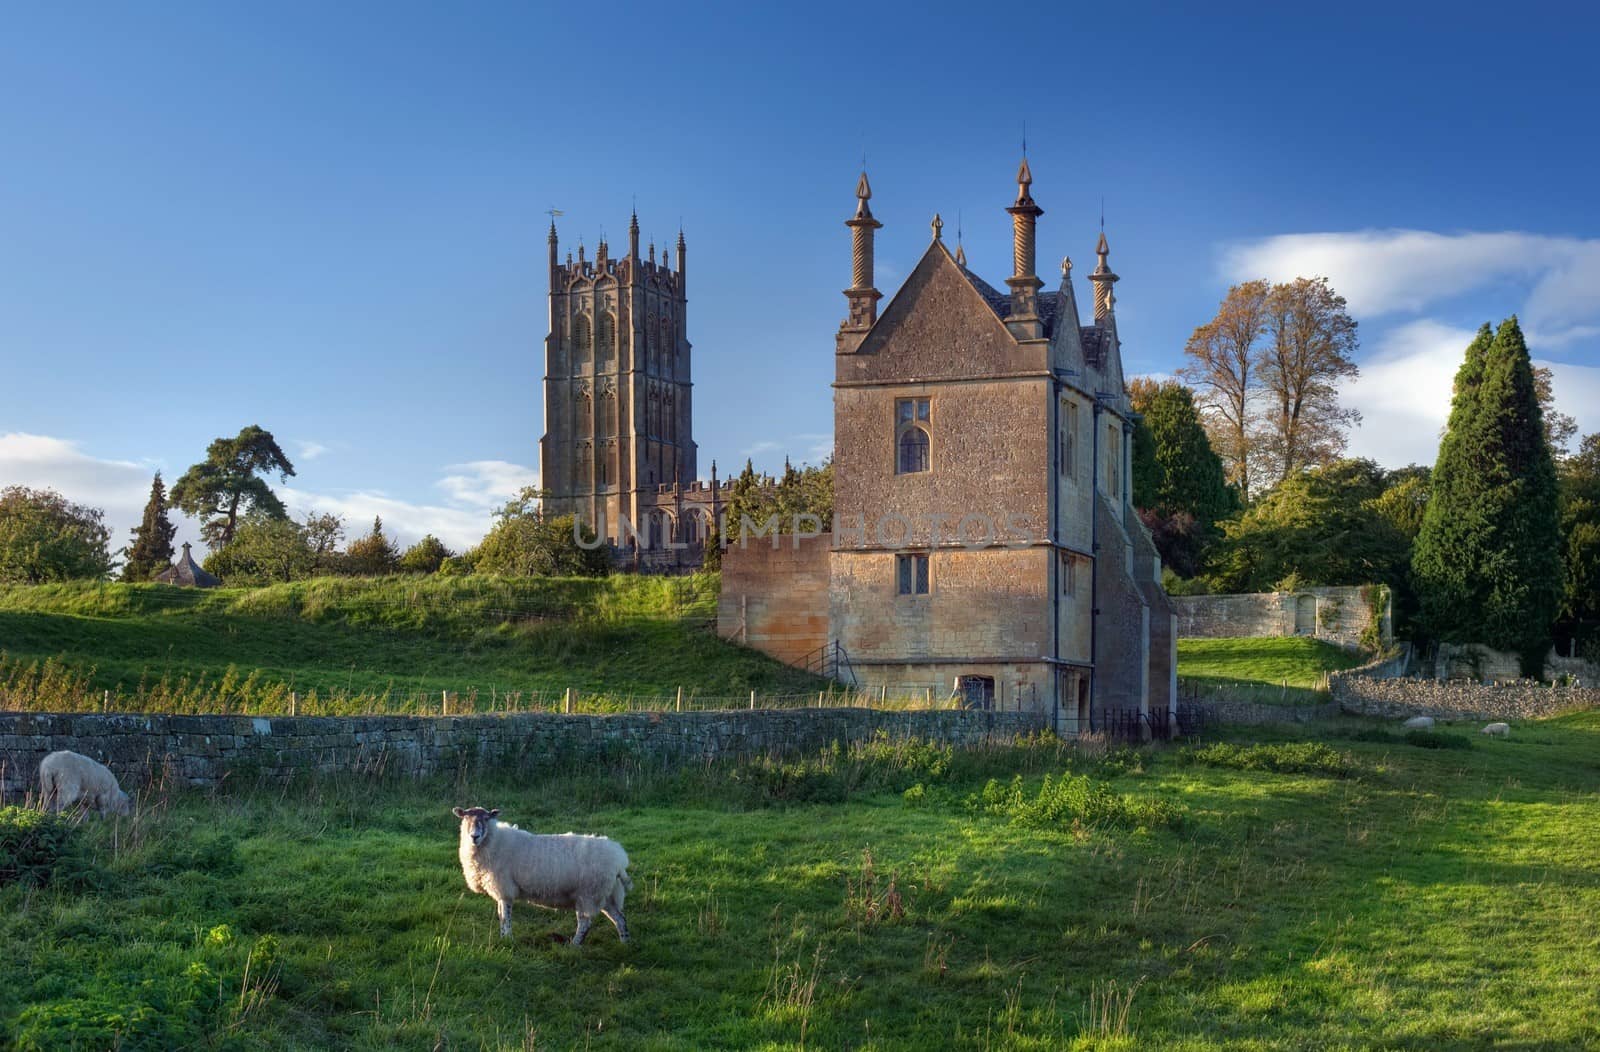 The historic Banqueting Hall and church at Chipping Campden, Gloucestershire, England.